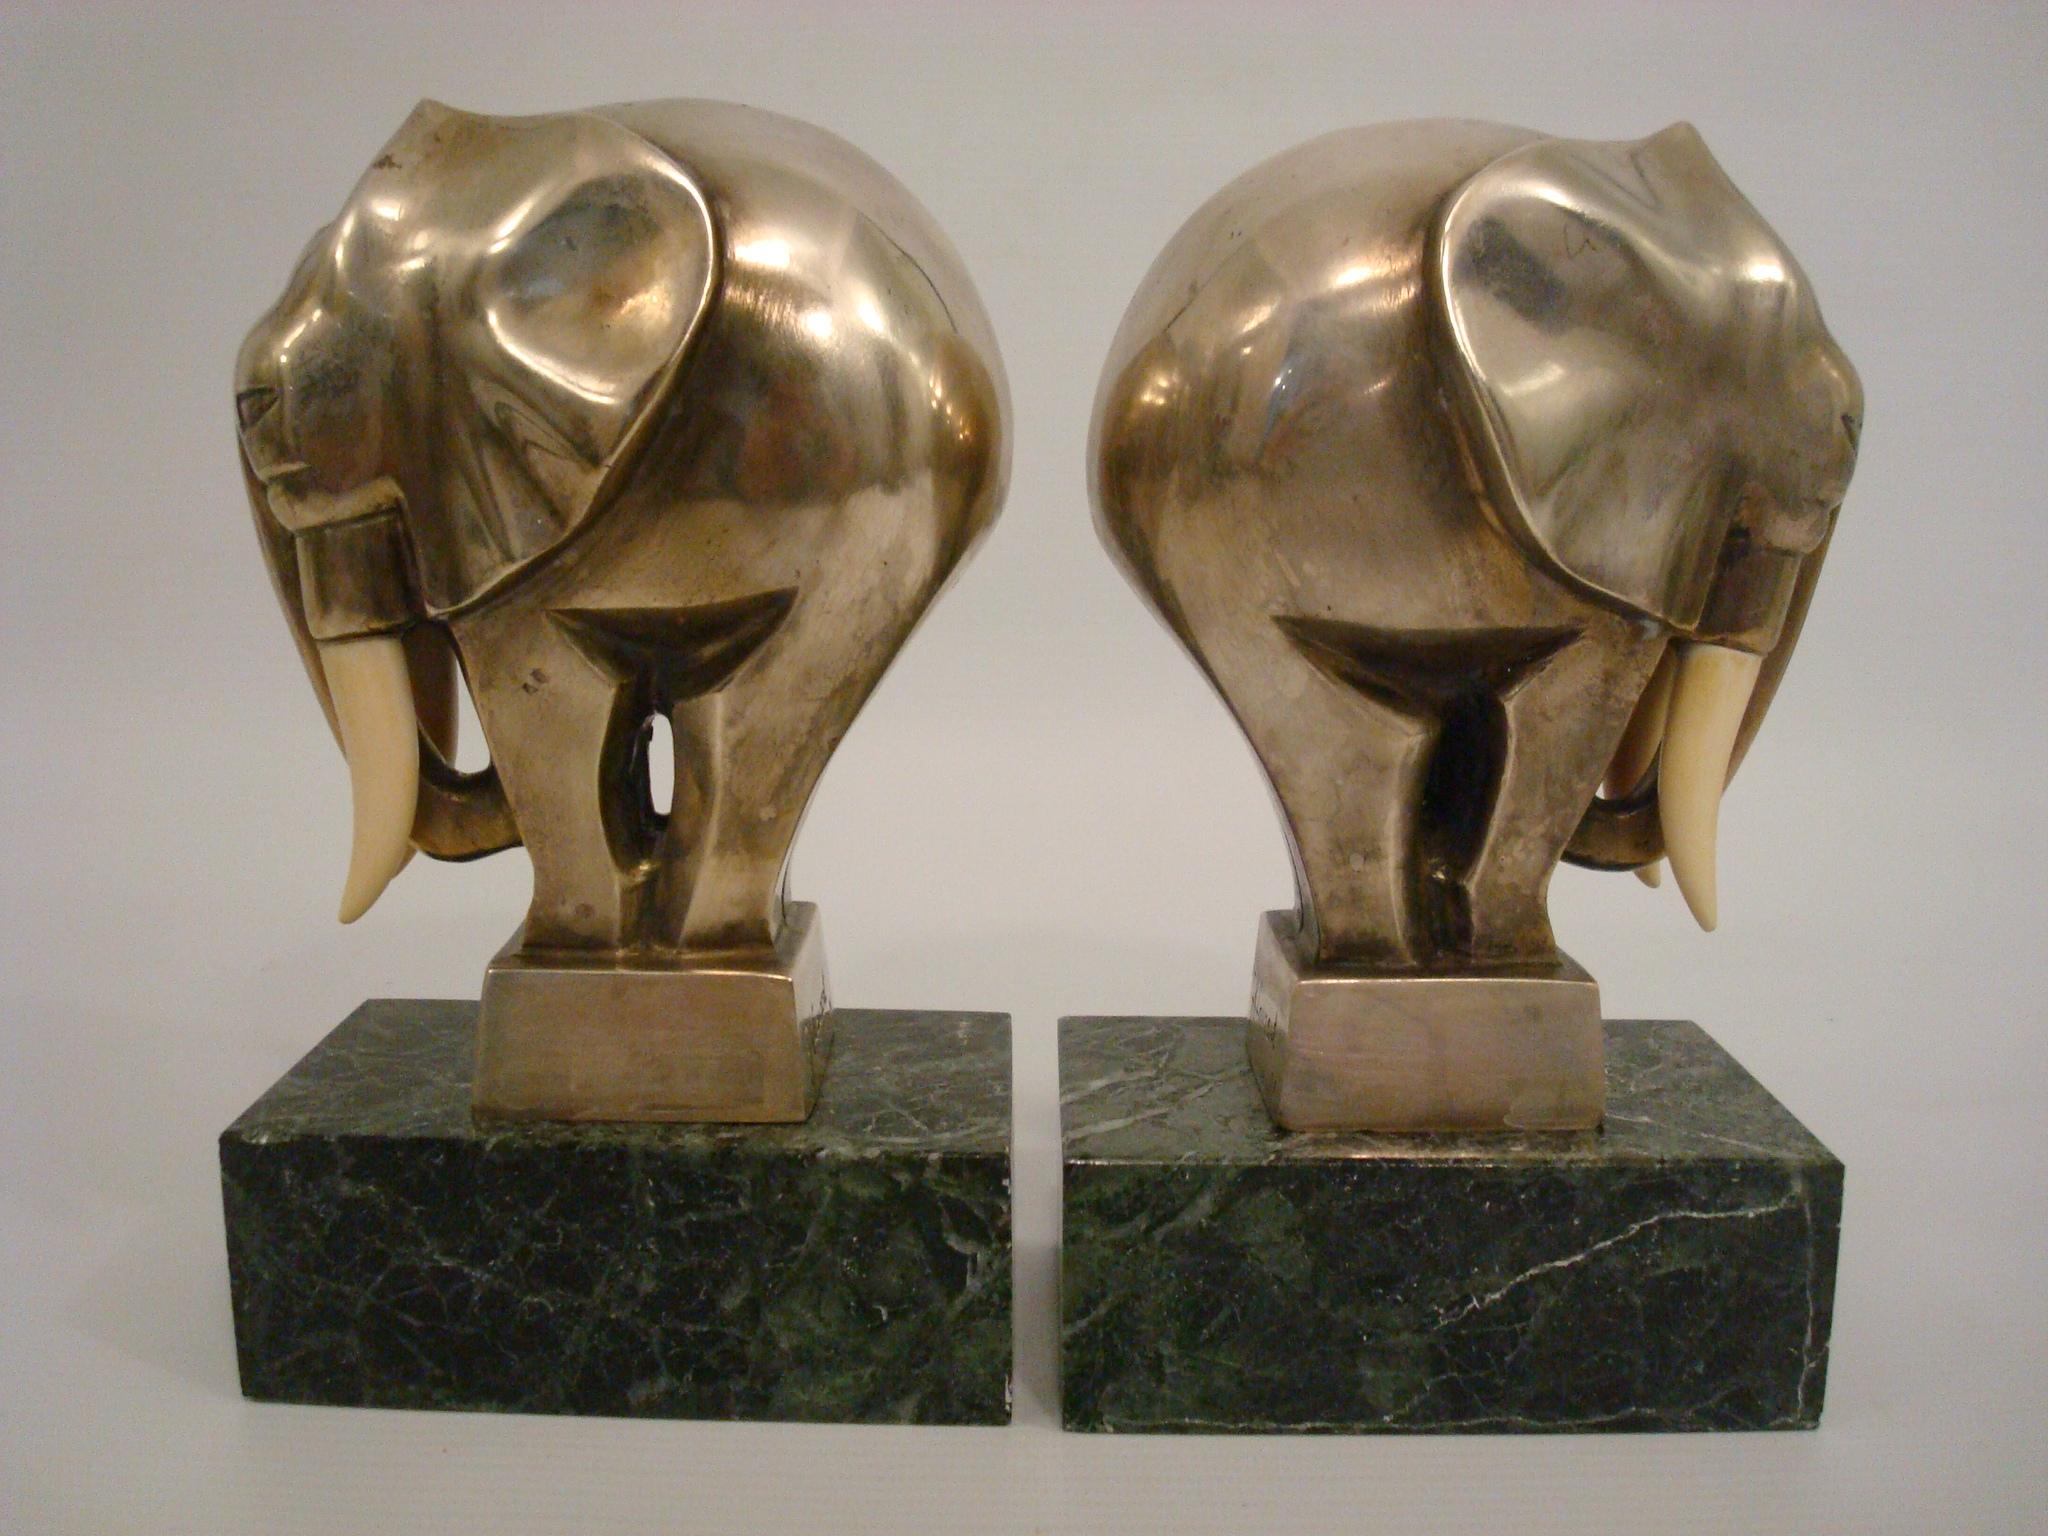 Art Deco silvered bronze elephant figure / sculpture bookends signed G. H. Laurent and stamped 24, France, 1920s. Perfect desk piece. Nice and heavy bronze bookends mounted over Green marble bases.
Excellent quelity.